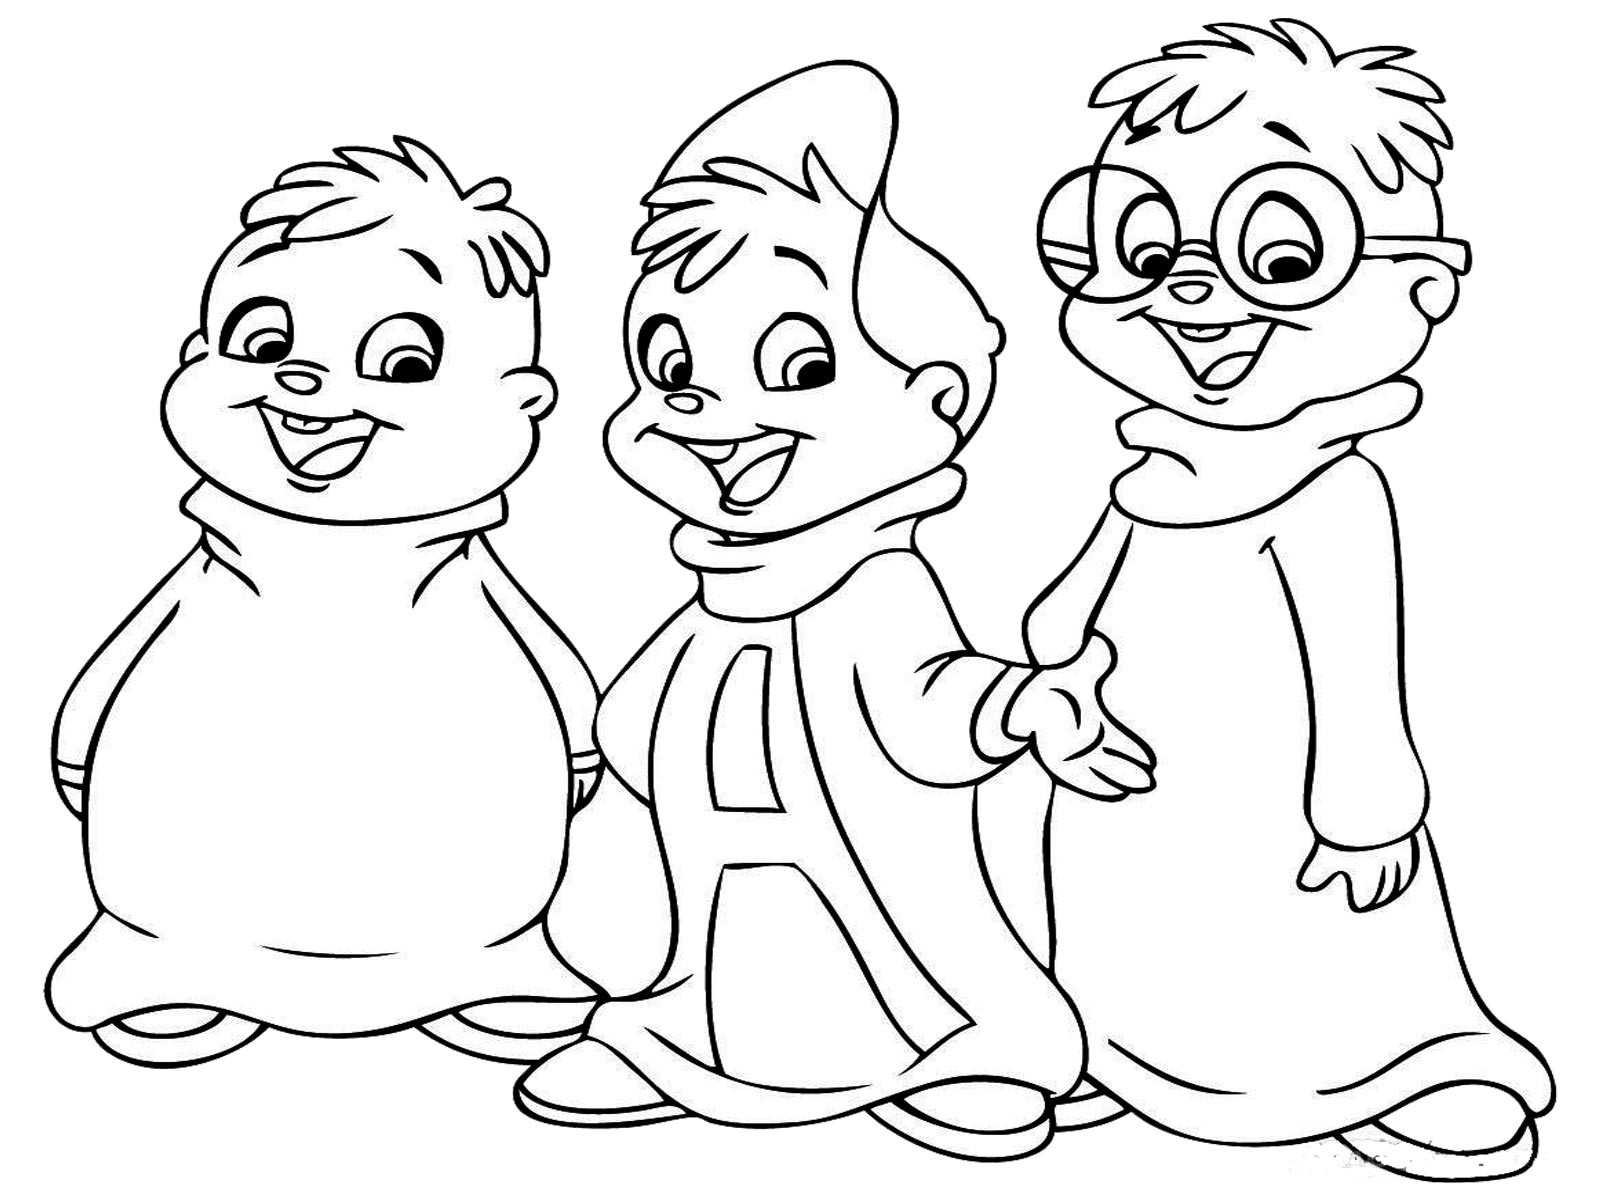 Coloring Pages For Boys Kids
 Coloring Pages for Boys 2018 Dr Odd